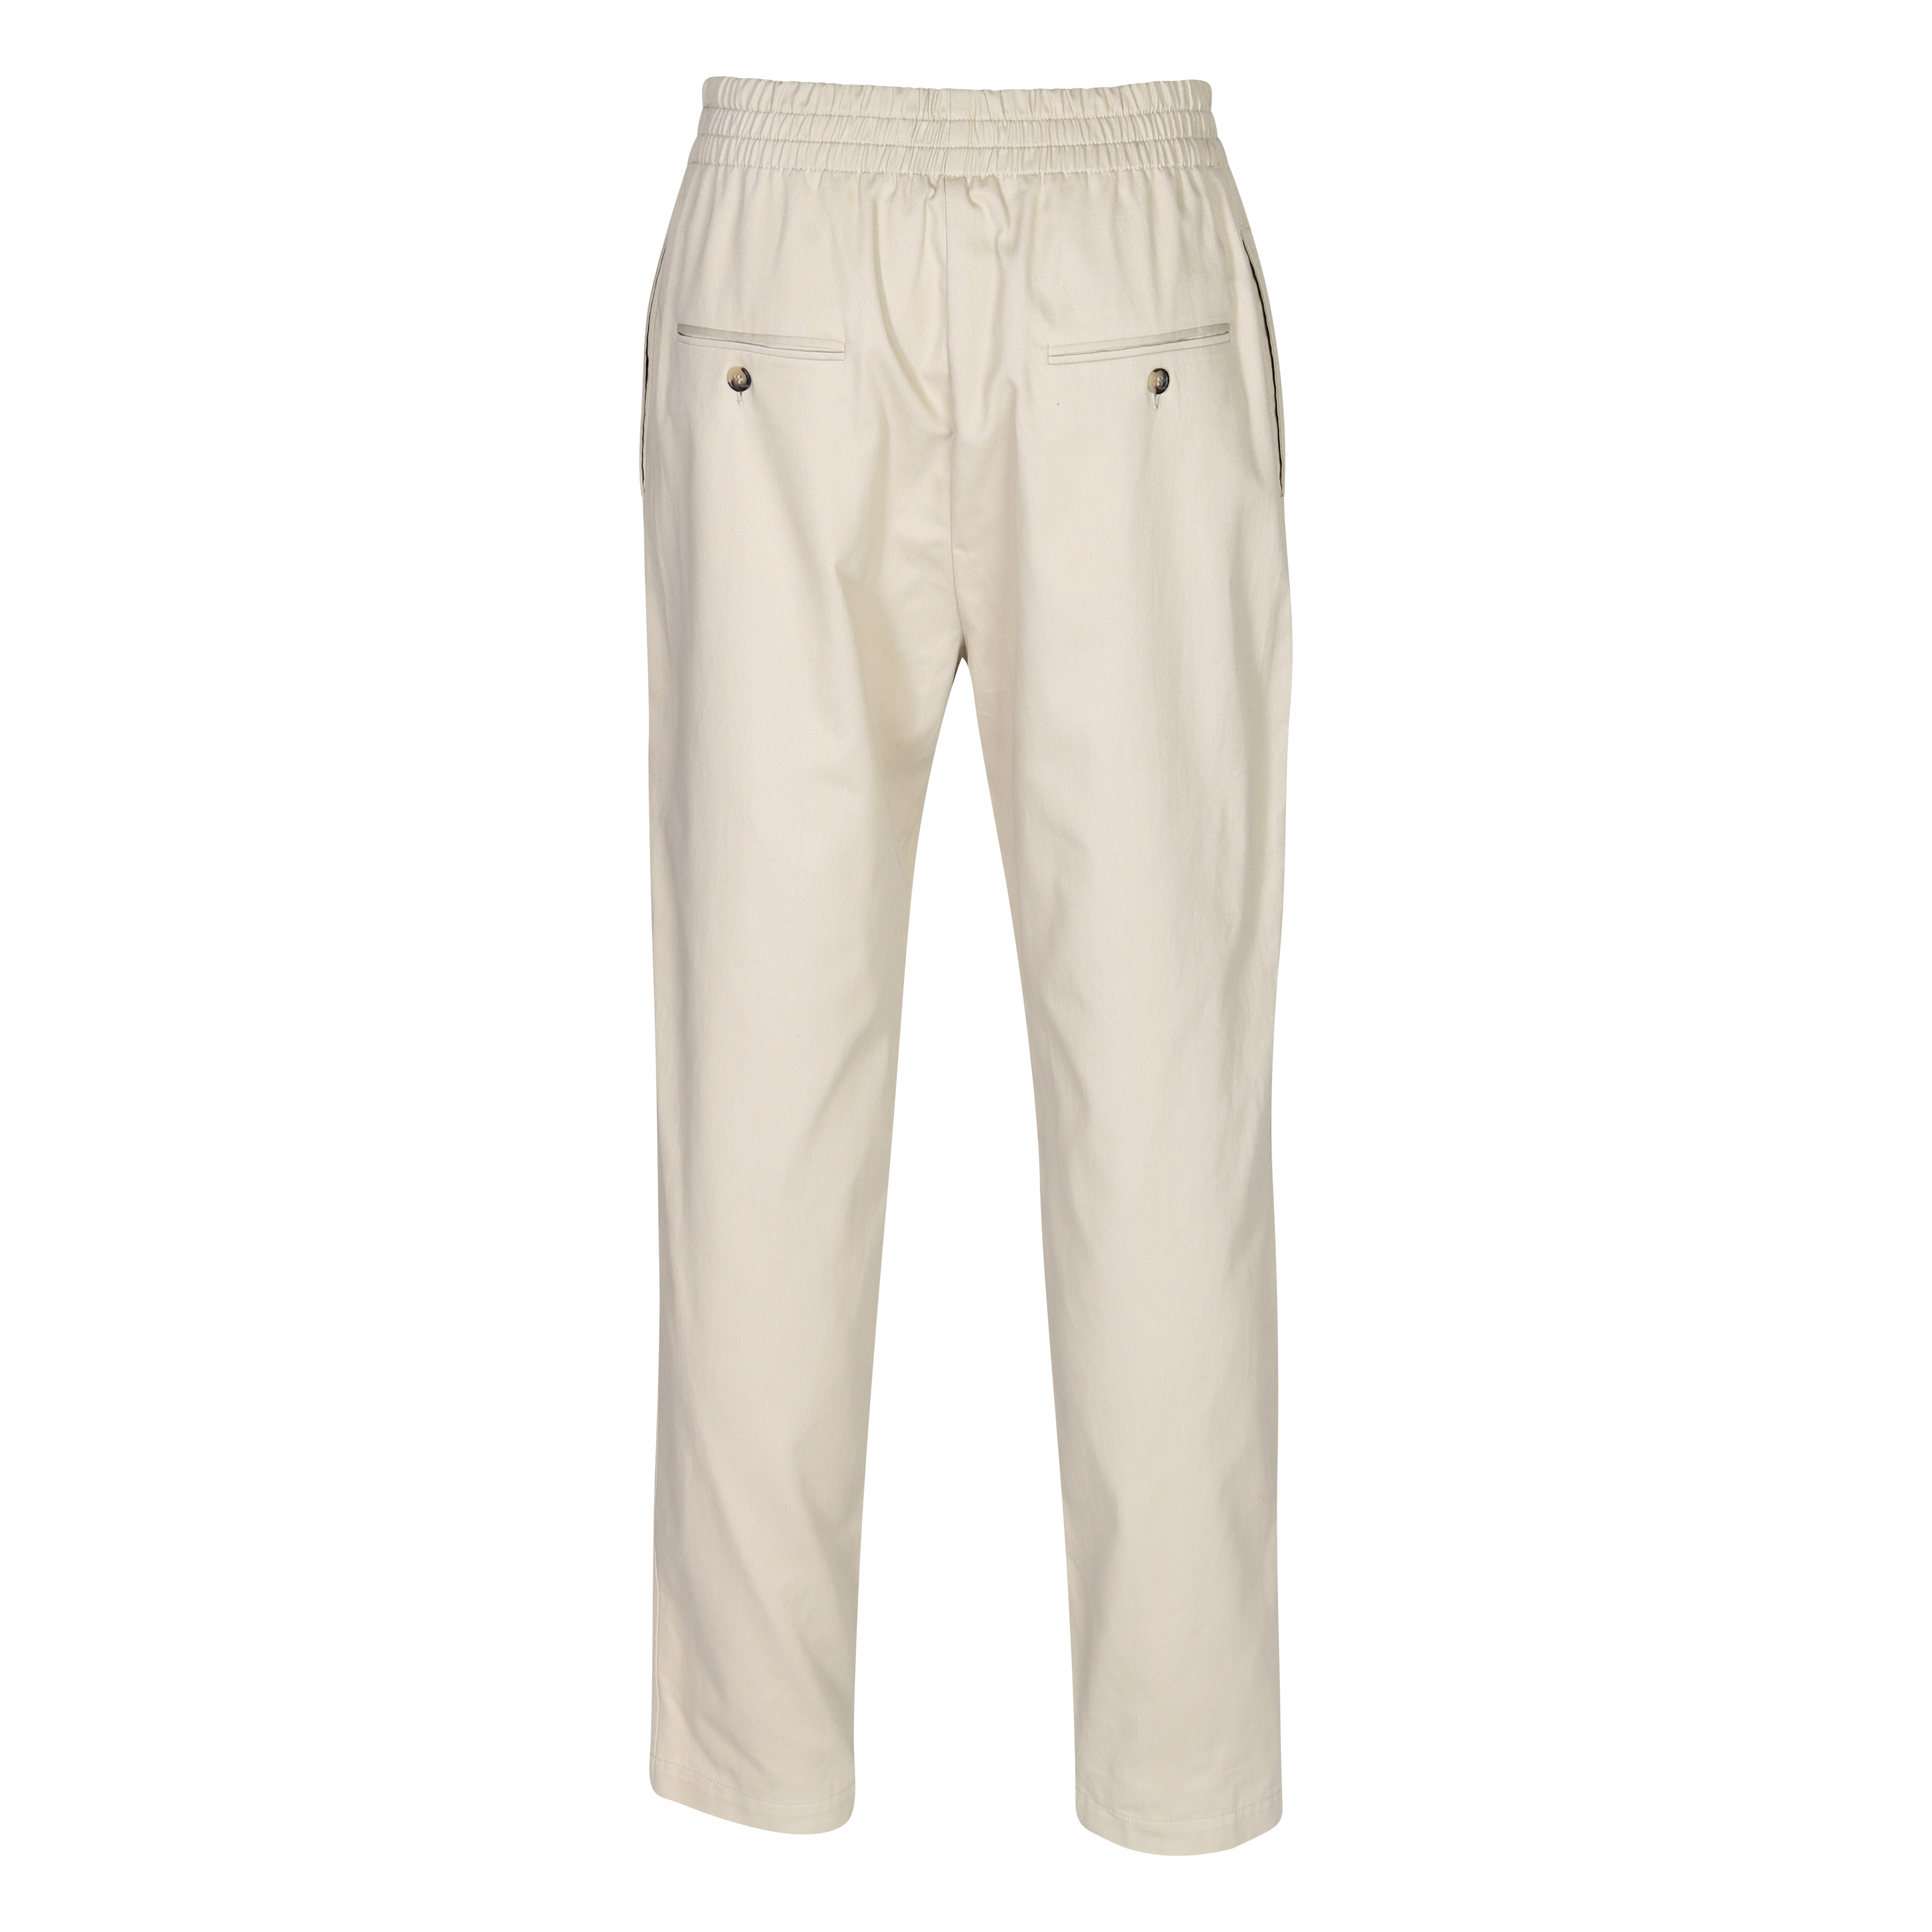 Isabel Marant Nailo Pant in Beige